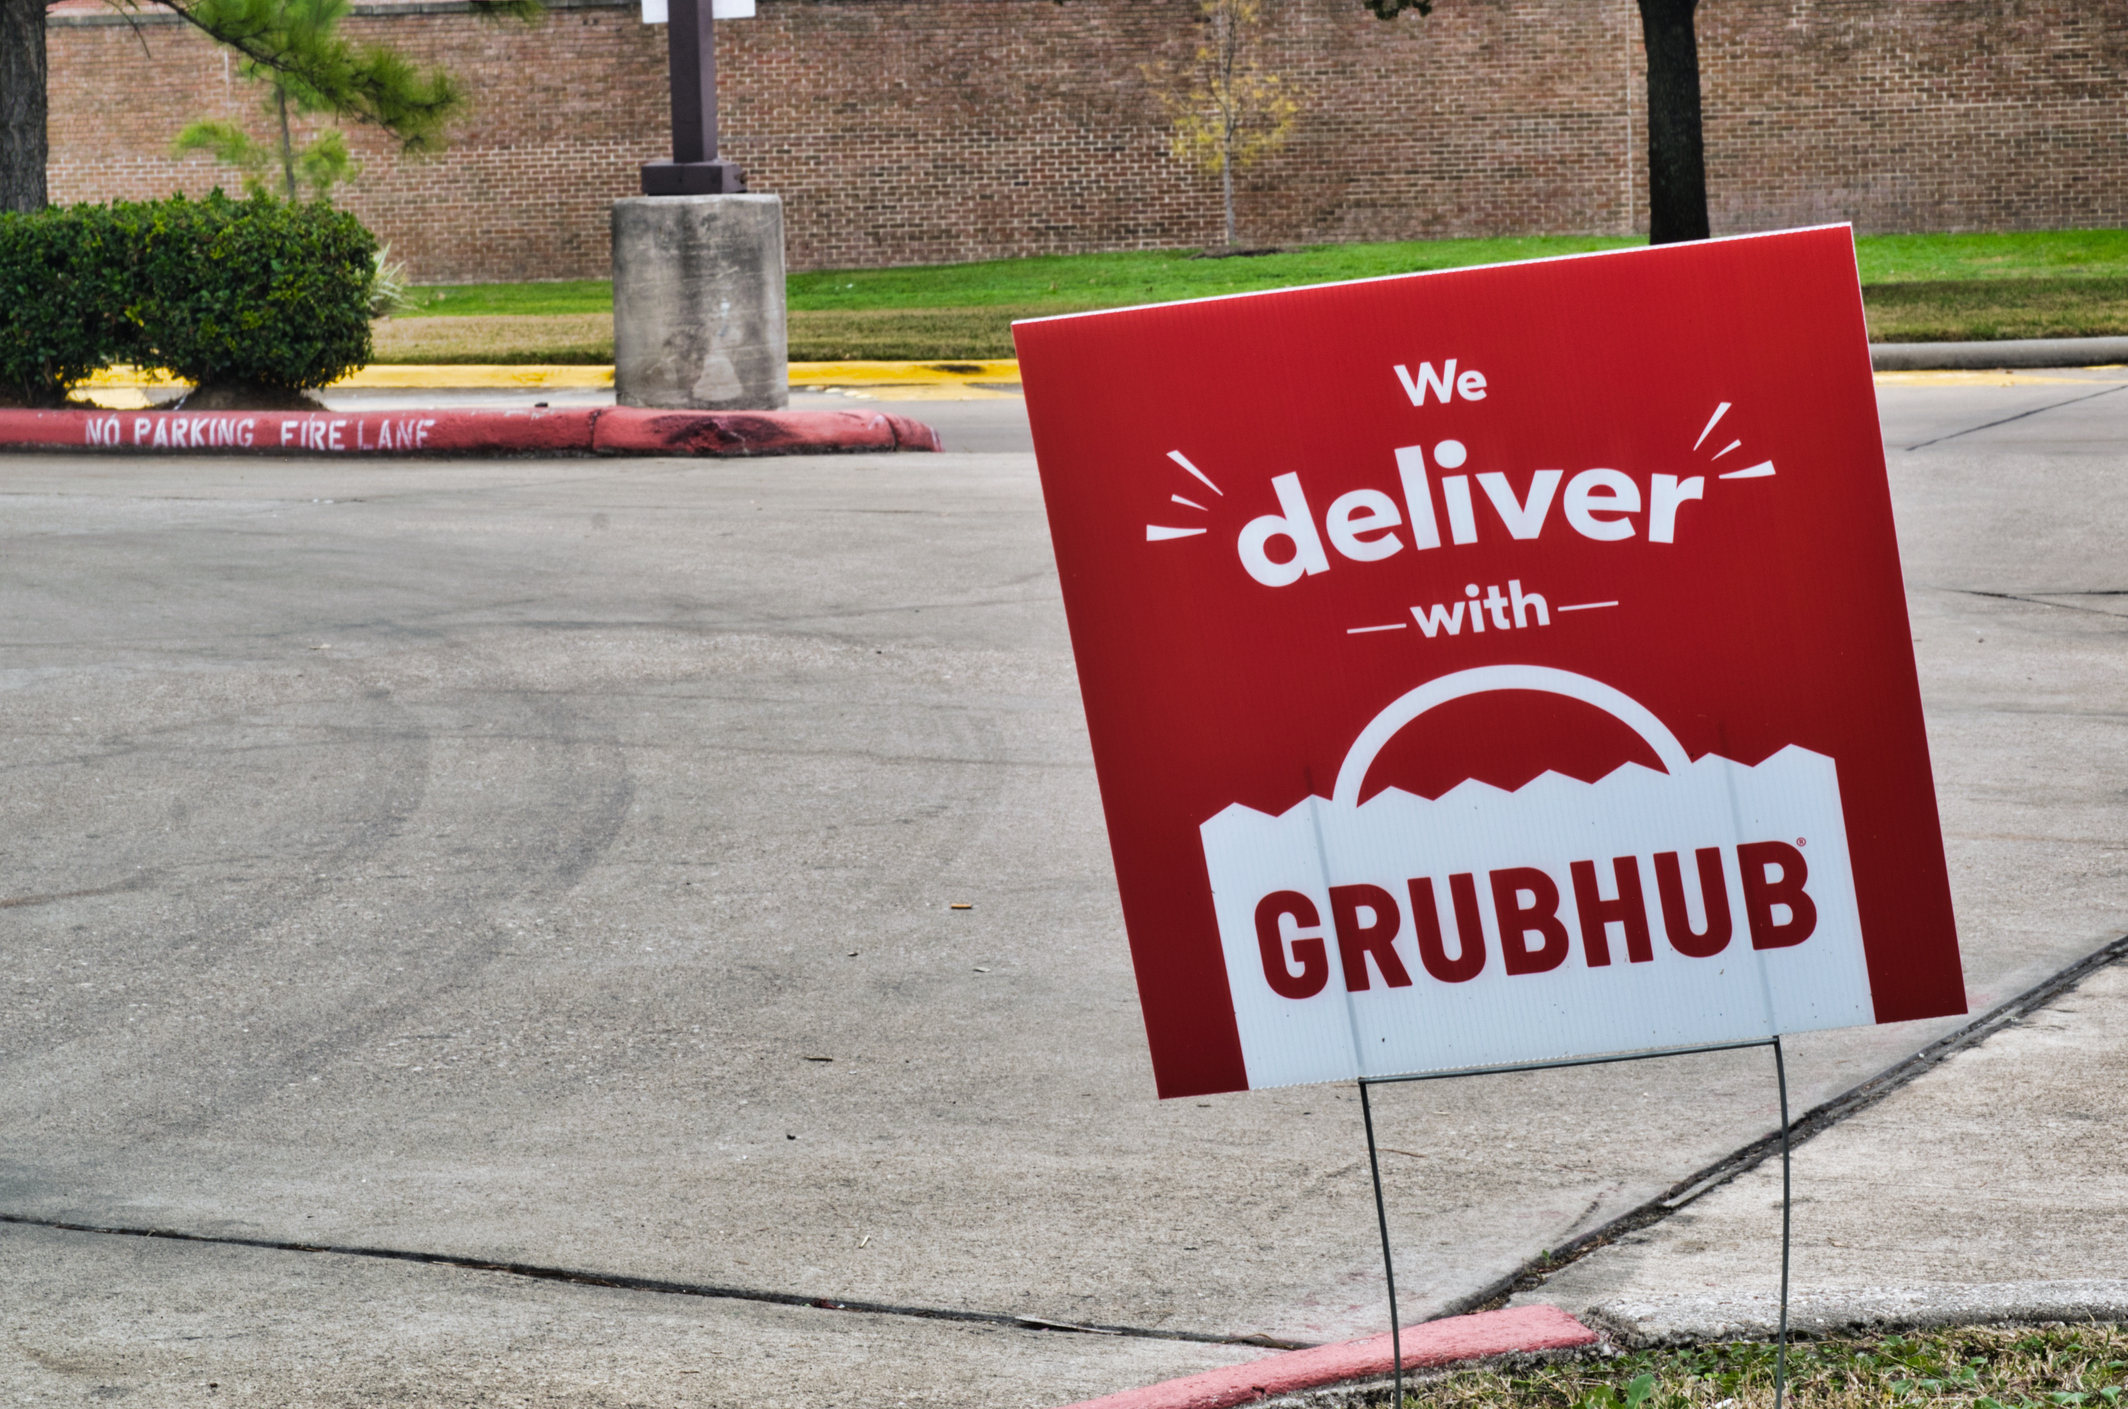 Grubhub gig workers react angrily to change in tipping policyintro image